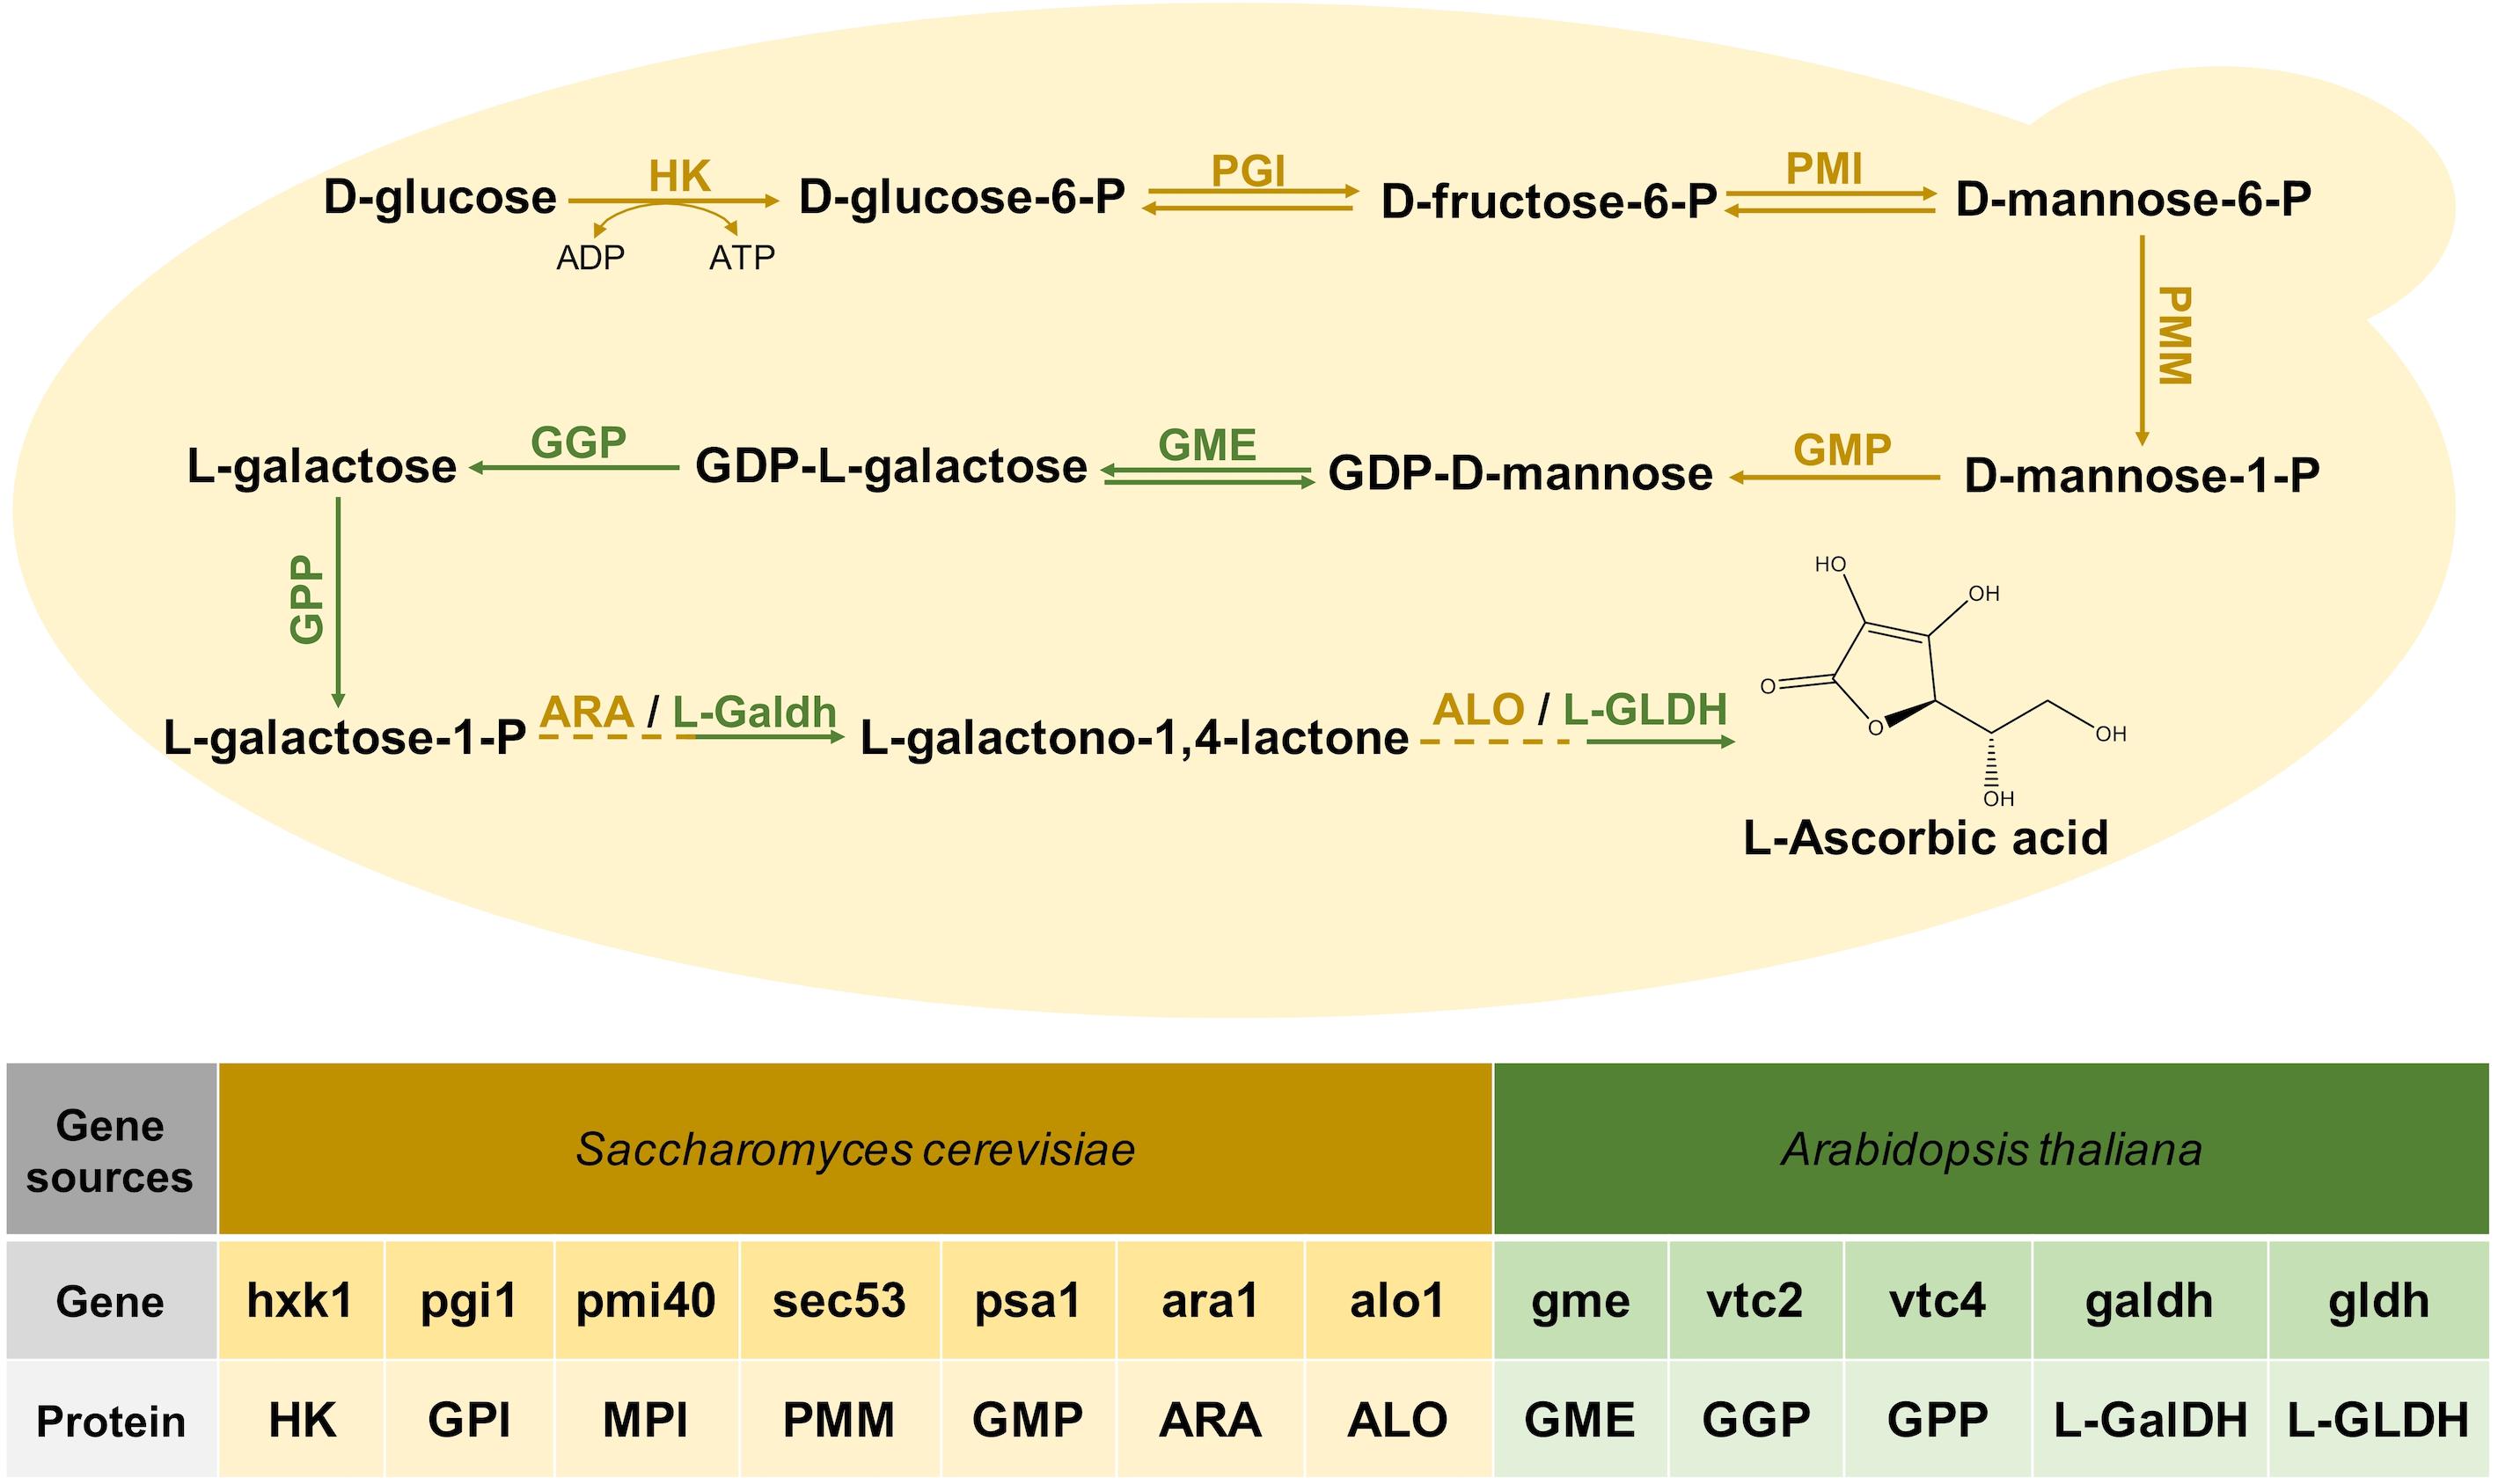 Frontiers | One-Step Biosynthesis of Vitamin C in Saccharomyces cerevisiae